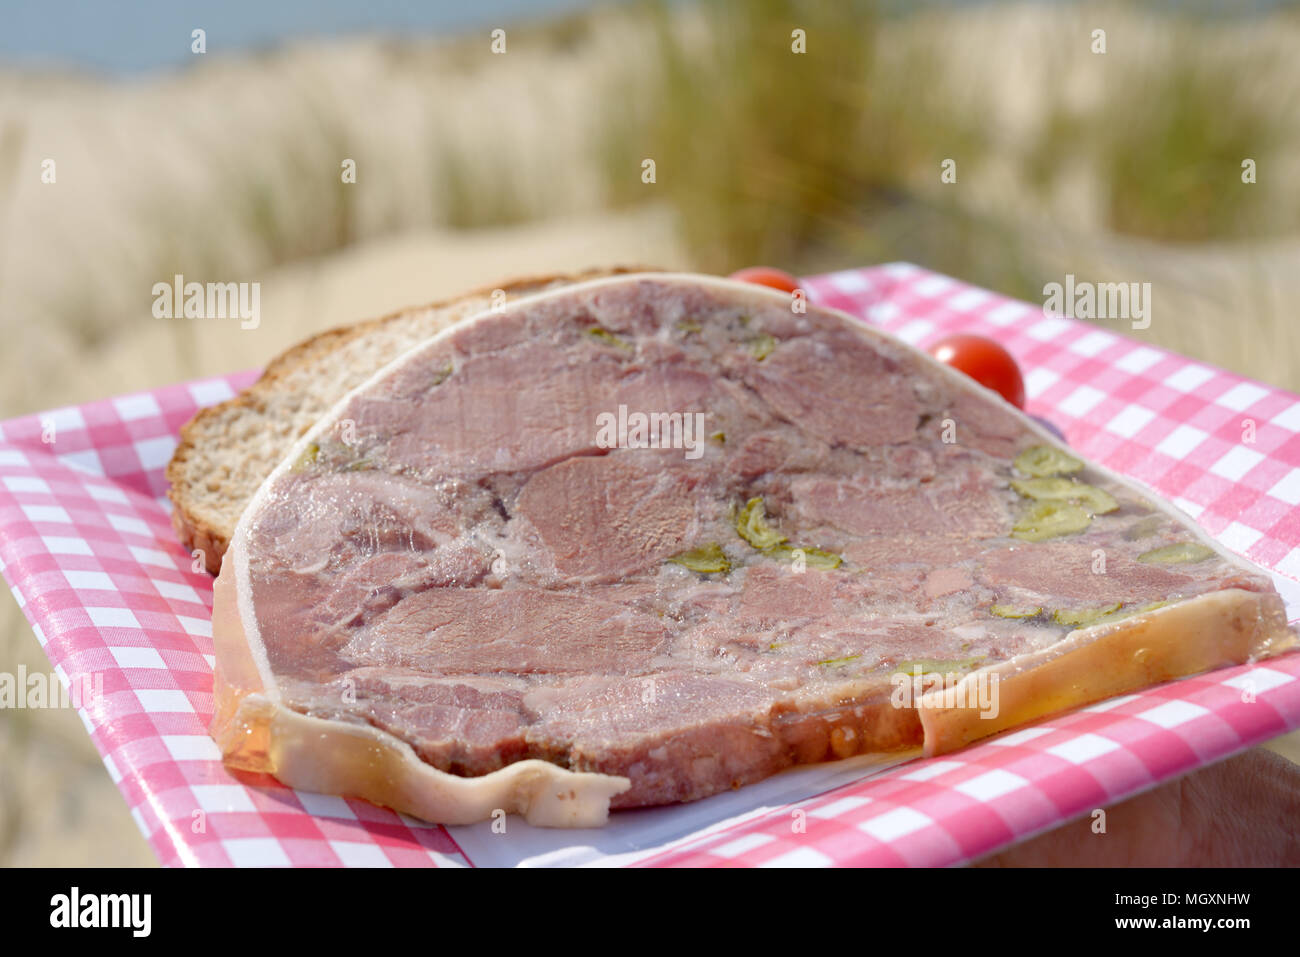 Slice of terrine on a paper plate during sea picnic Stock Photo